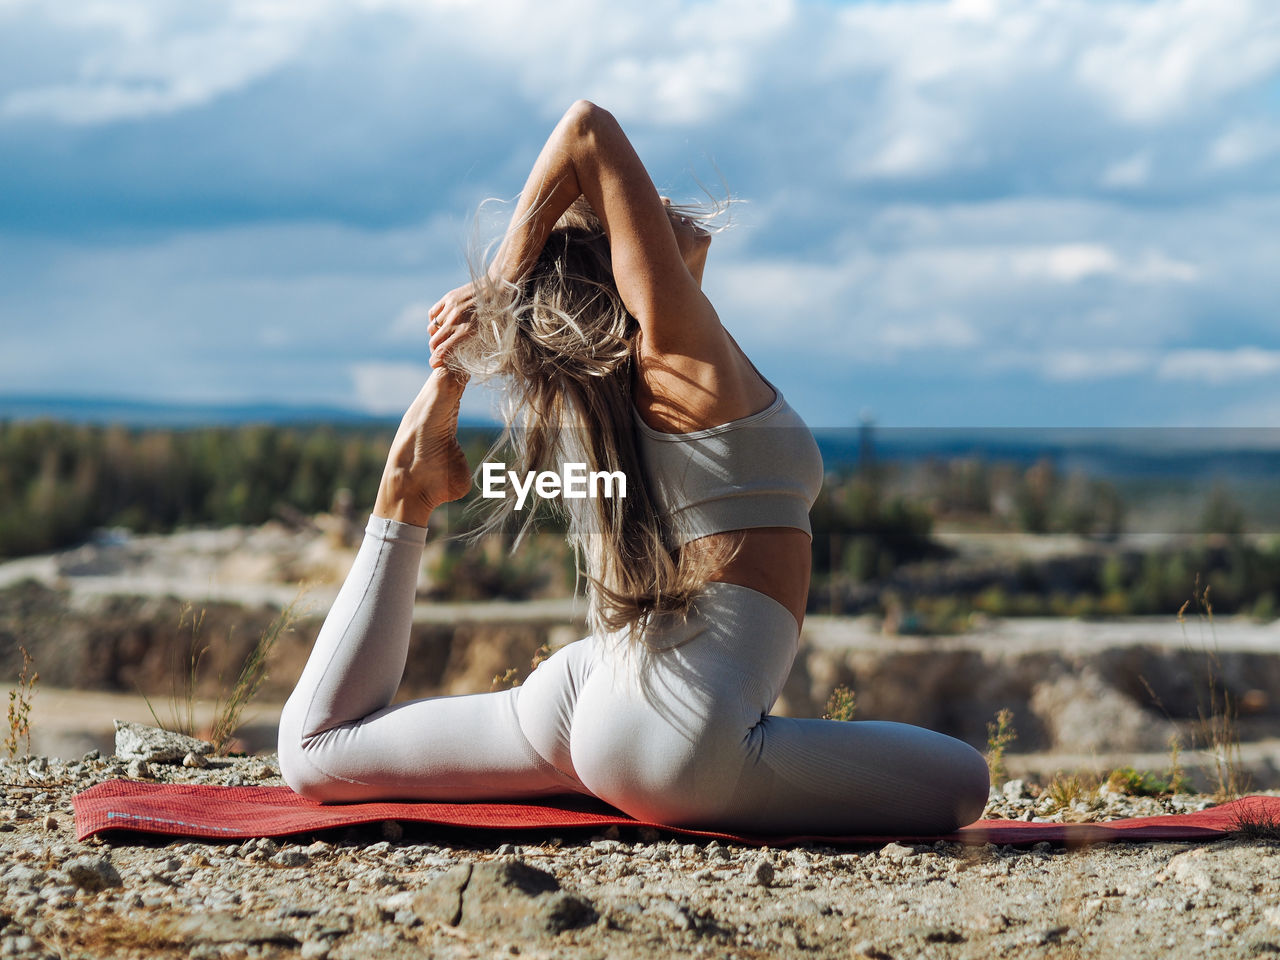 Young beautiful blond woman with long hair in activewear doing yoga pose in outdoor training in hill